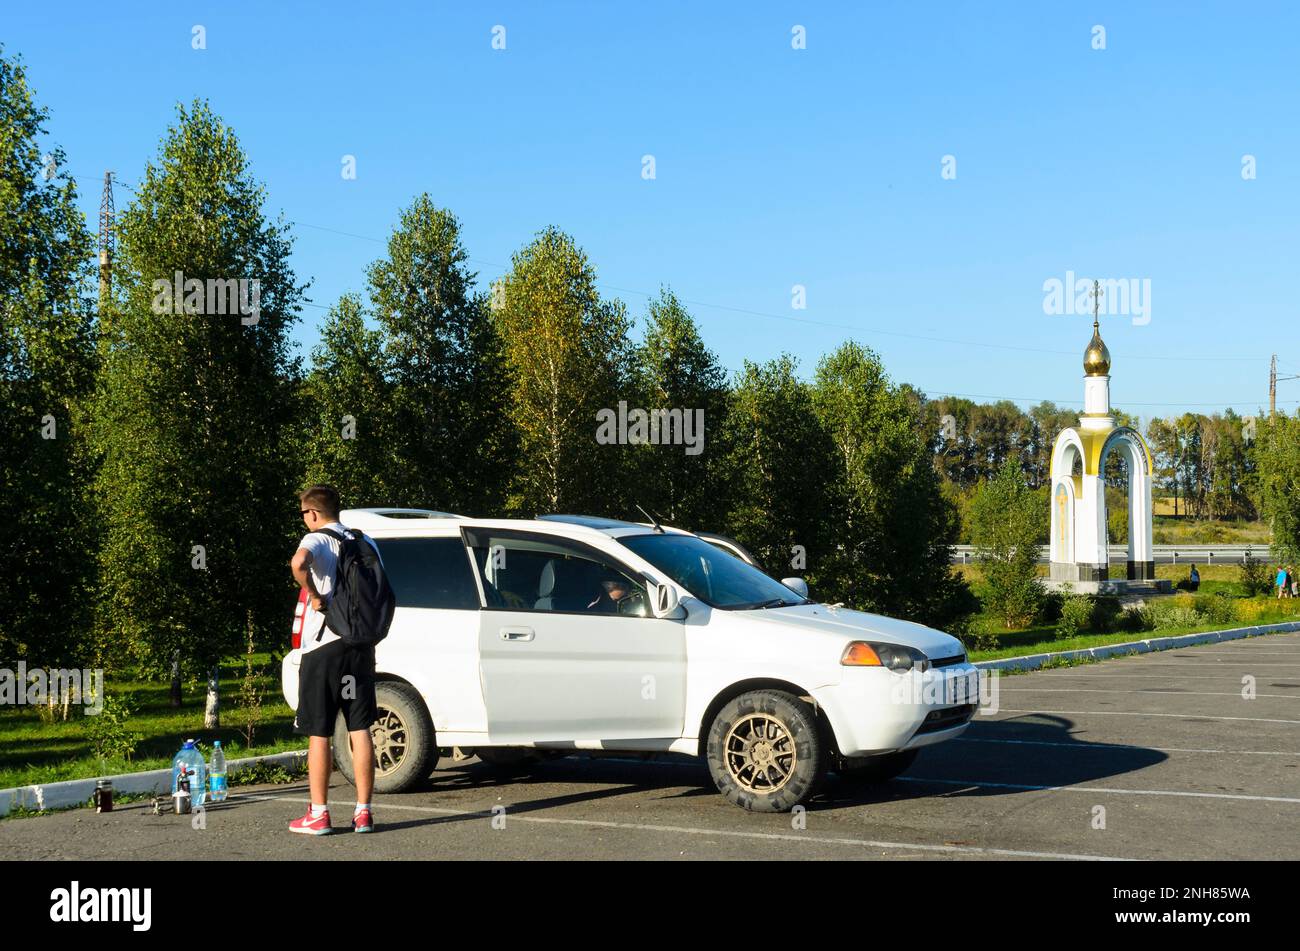 Male hiker with backpack in sneakers 'Nike' is the car 'Honda' next to the gas burner and the water bottles in front of a chapel and tourists Stock Photo